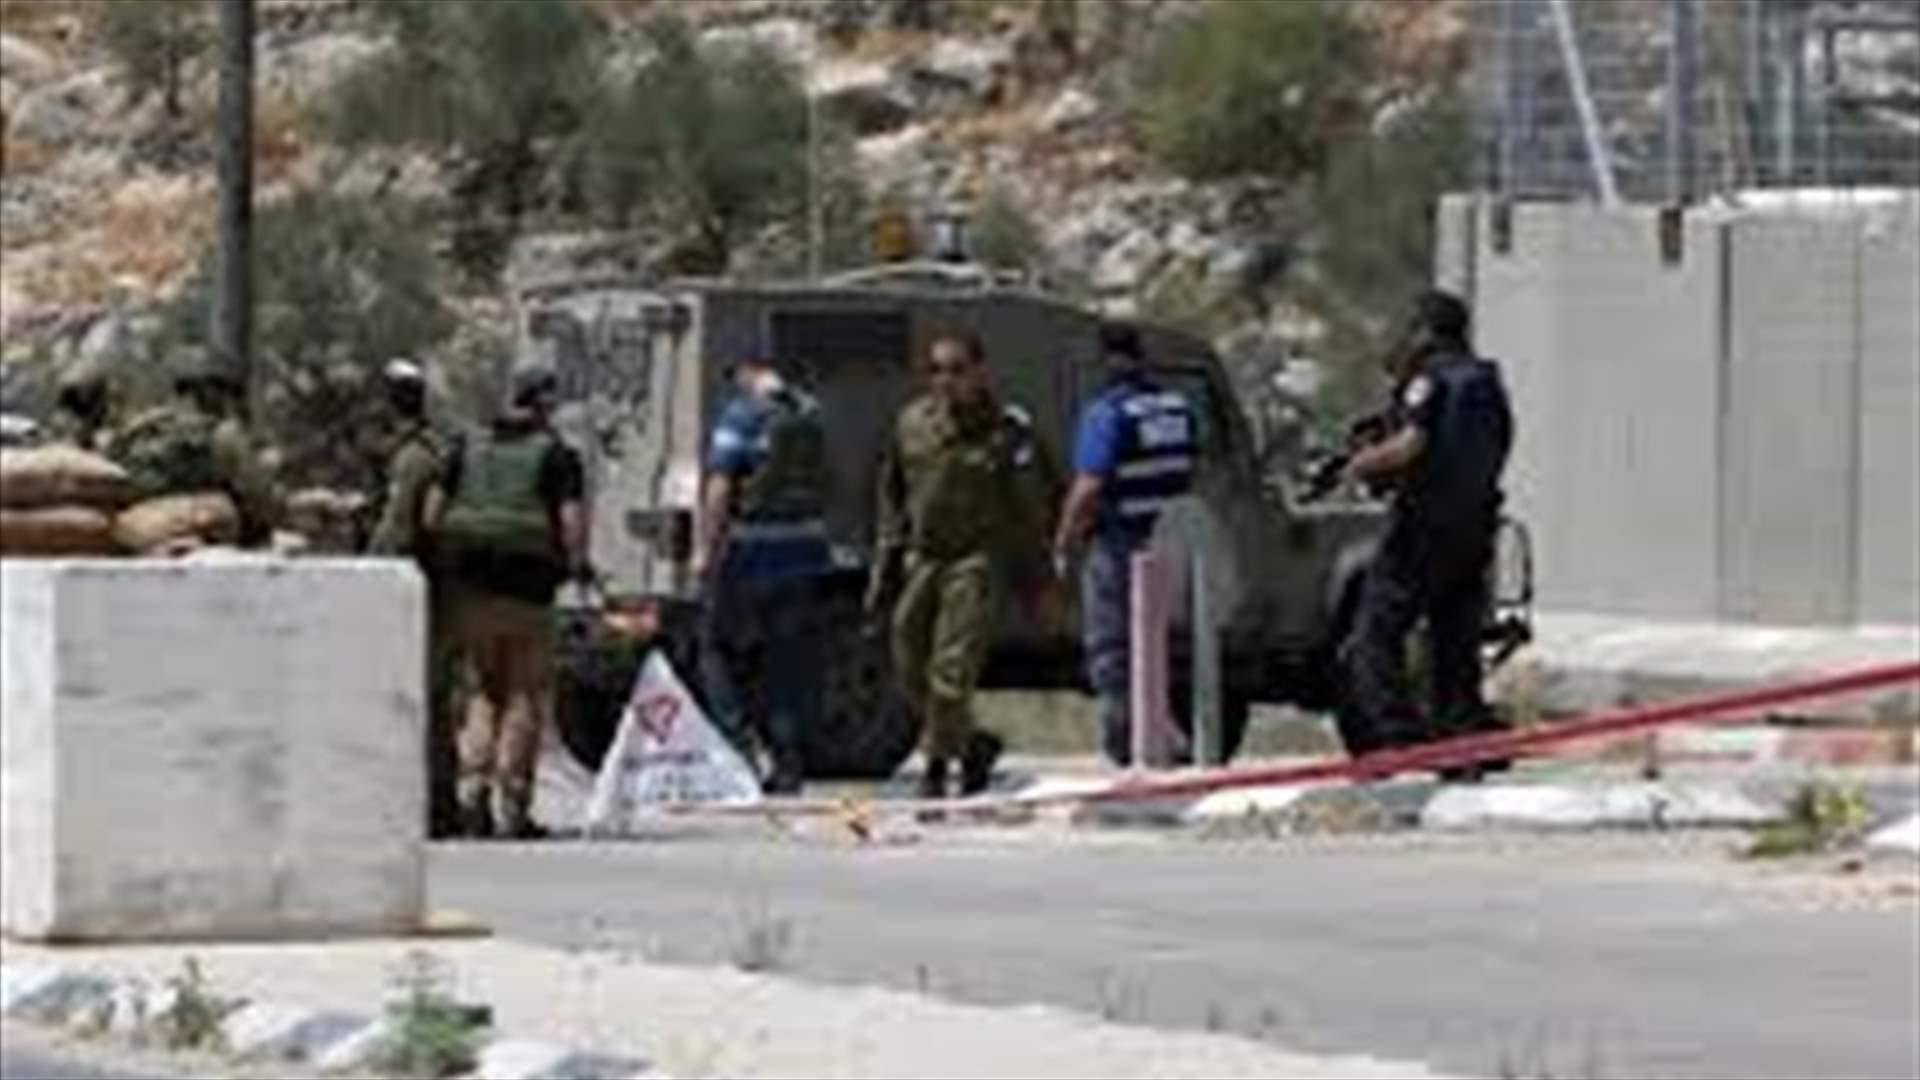 Palestinian tries to stab soldier in West Bank, shot dead - army